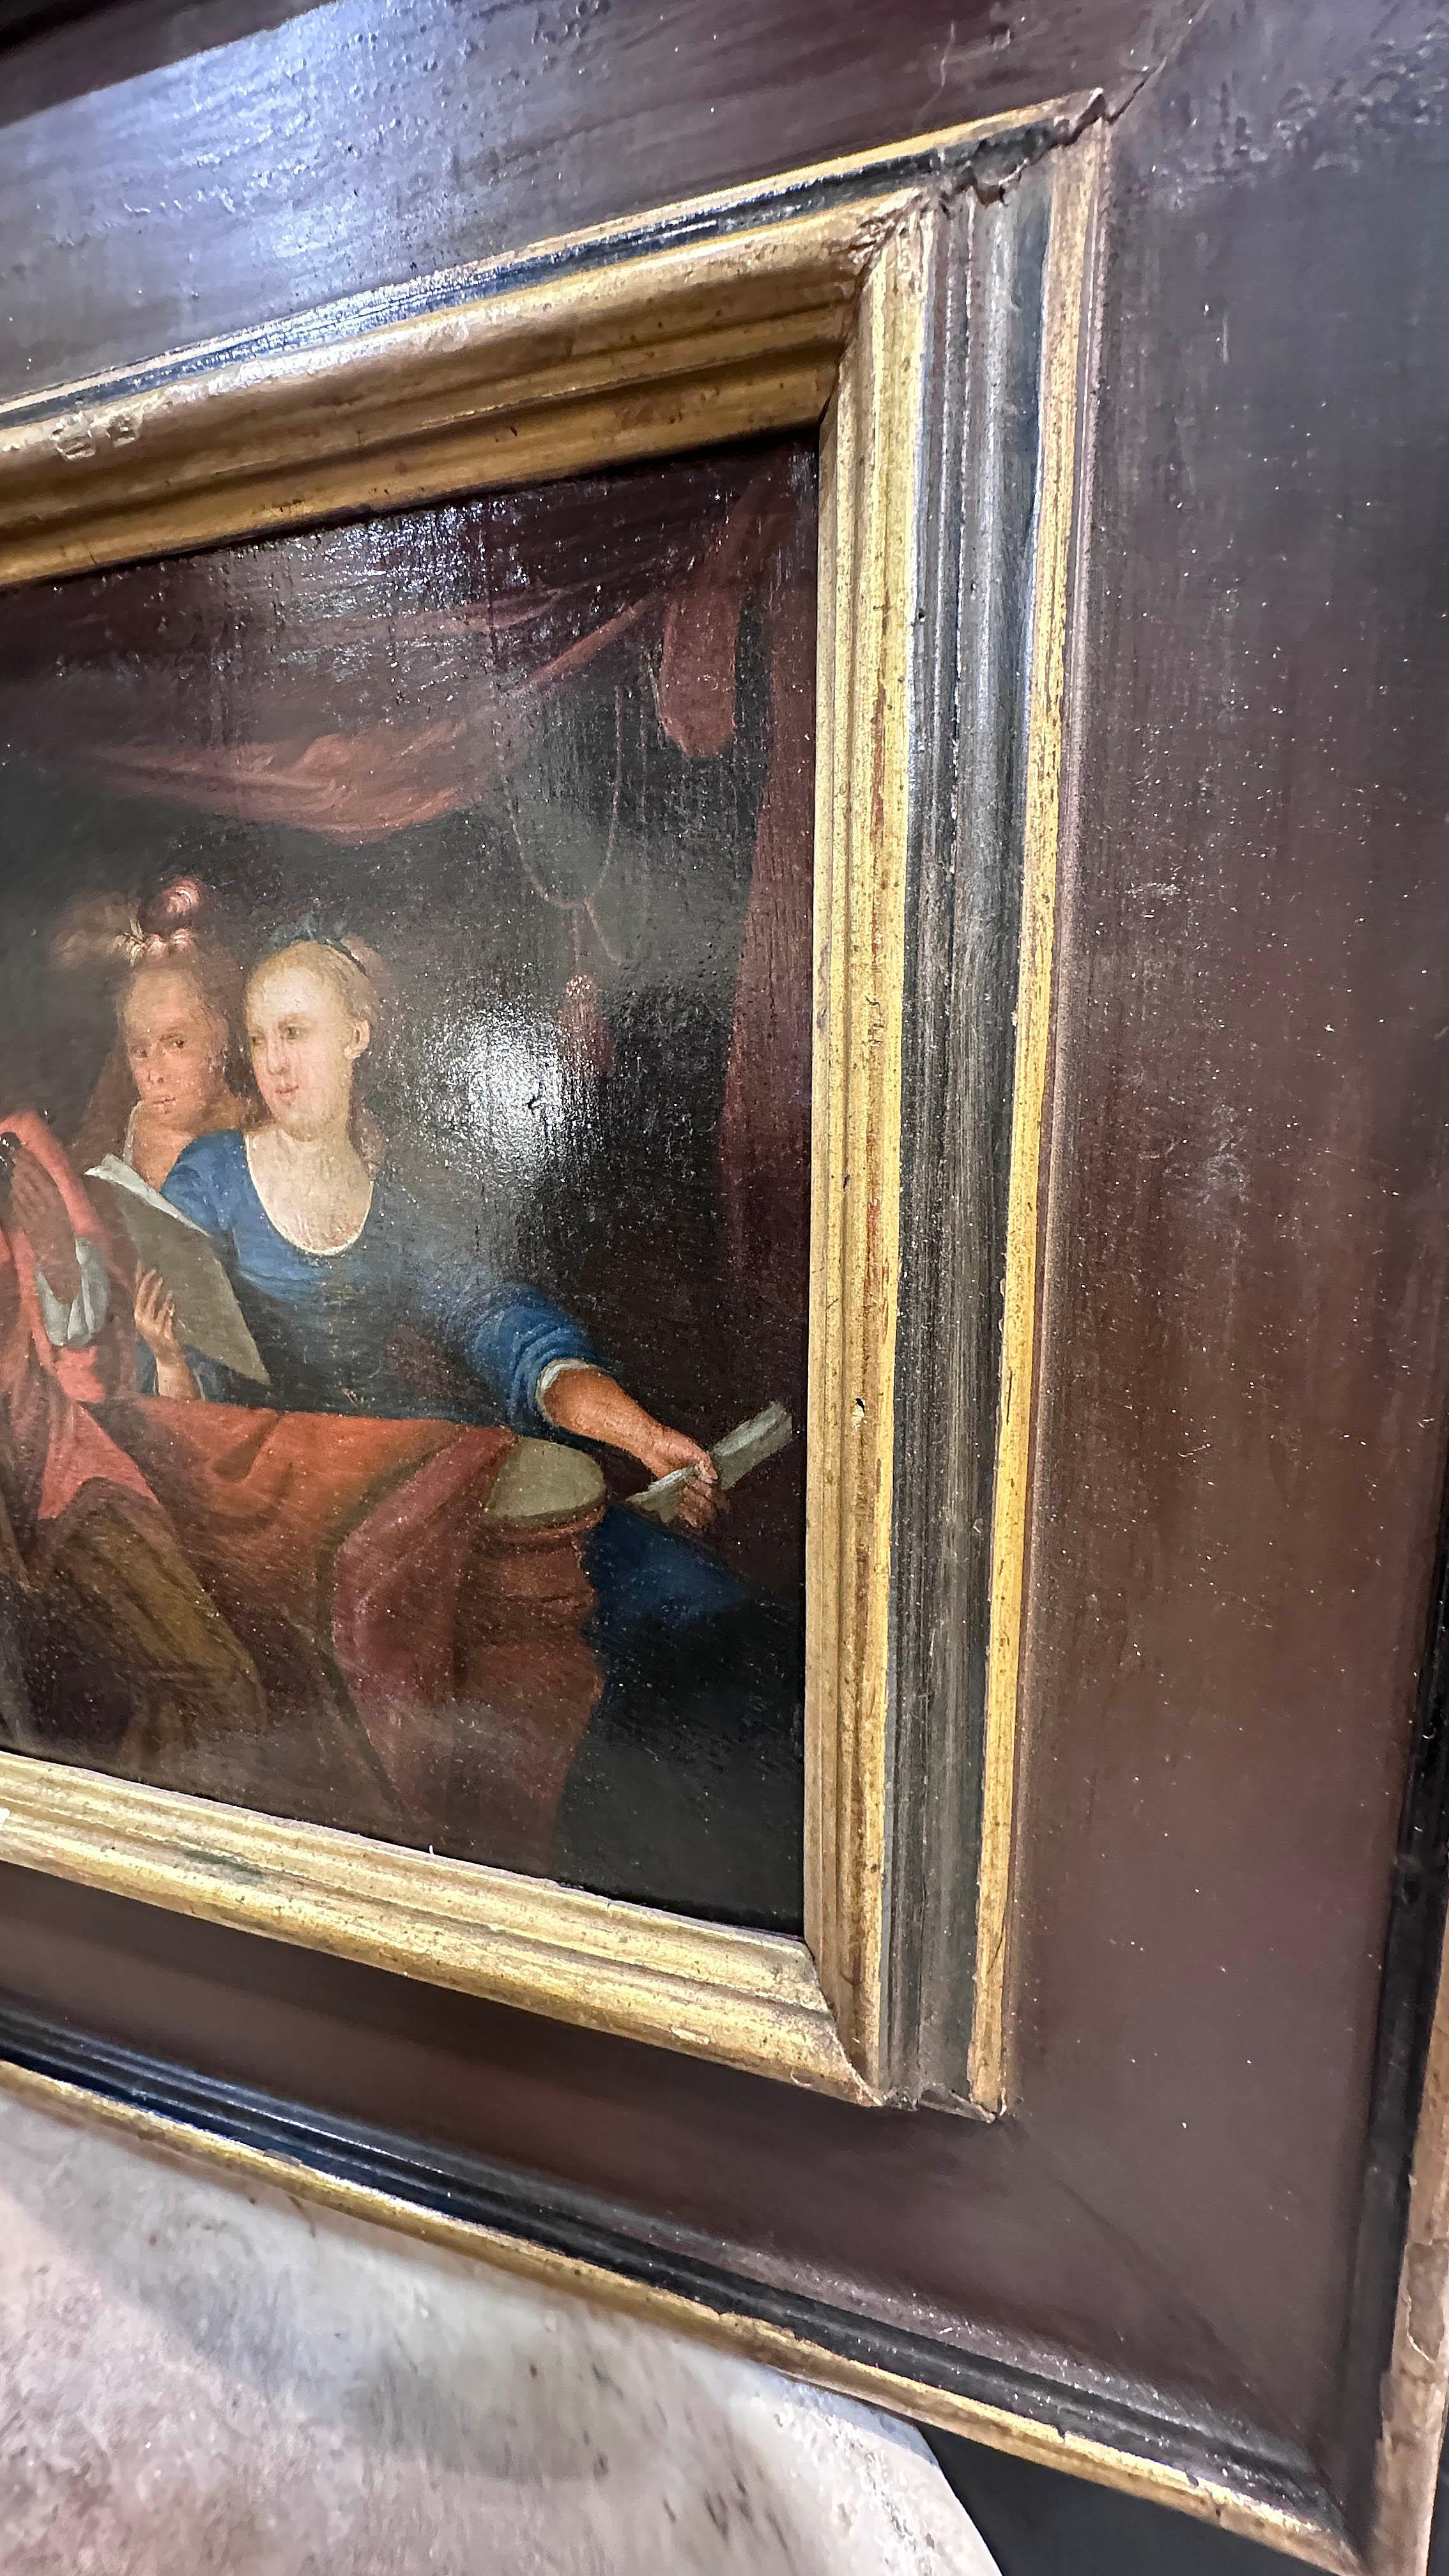 17th CENTURY PAINTING WITH PARTY AND CONCERT IN A PALACE For Sale 2